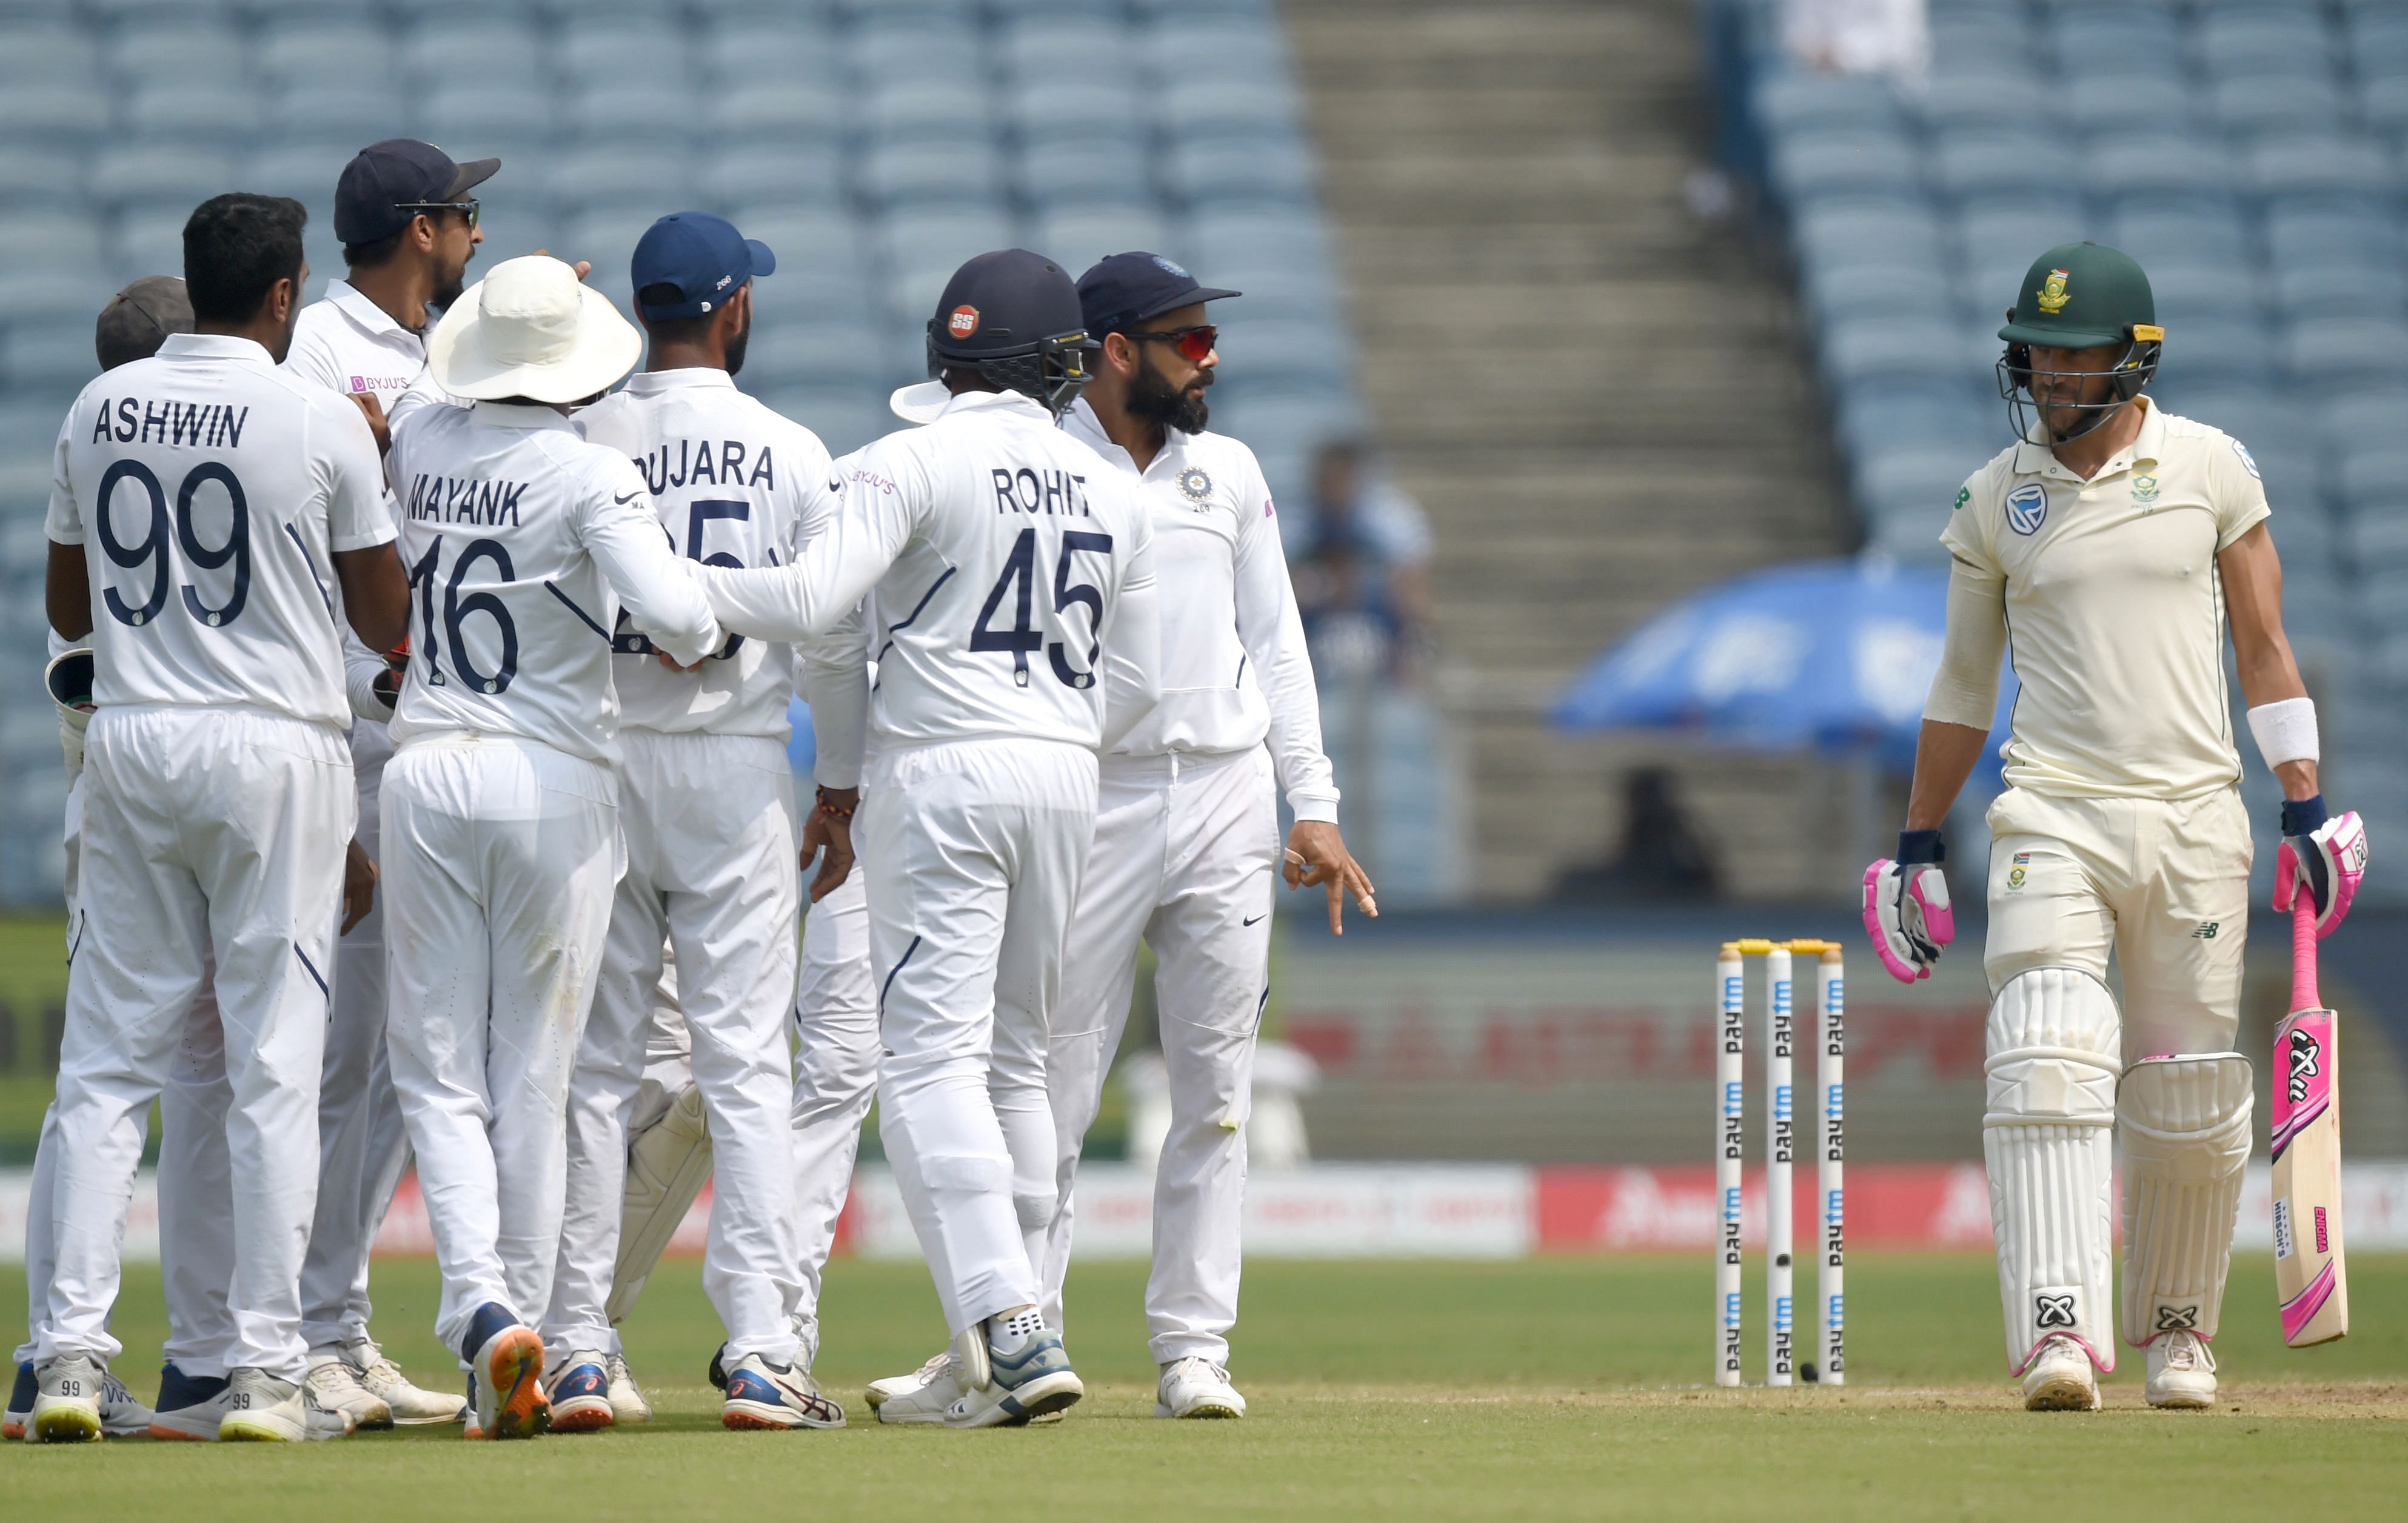 India's captain Virat Kohli (C) celebrates with teammates after the wicket of South Africa captain Faf du Plessis (R) during the fourth day of play of the second test cricket match between India and South Africa, at the Maharashtra Cricket Association Stadium in Pune. (AFP Photo)